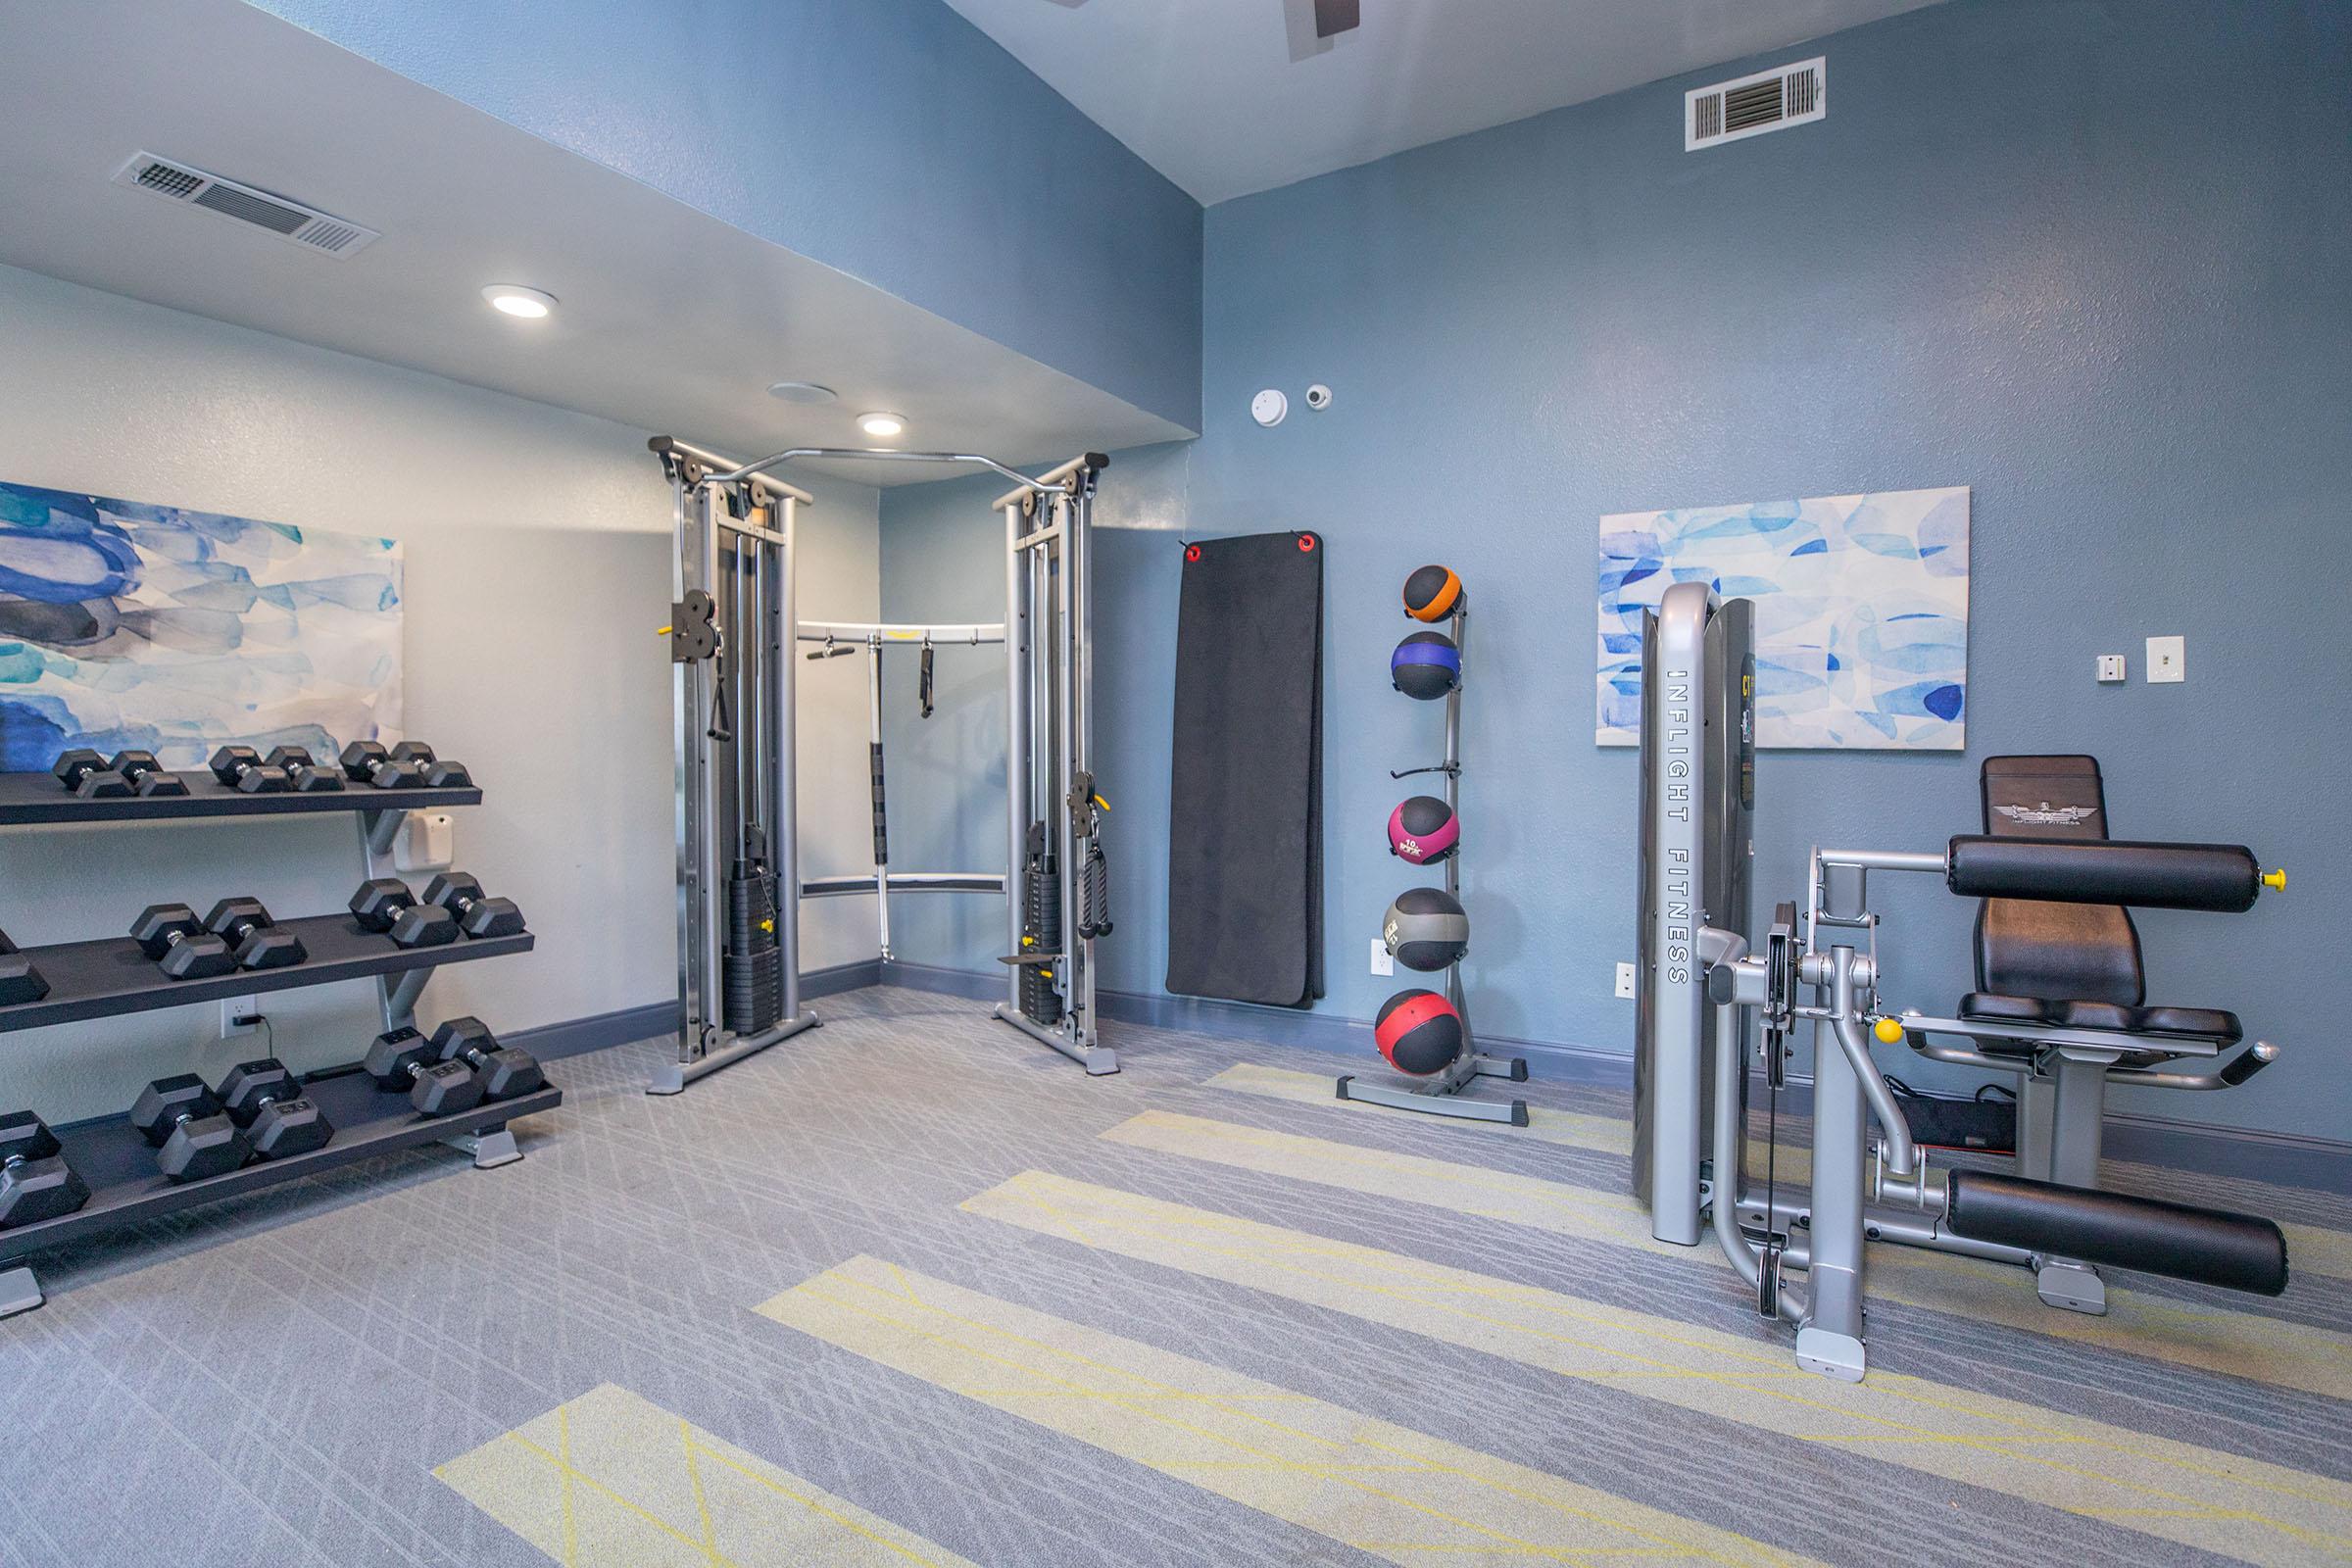 The fitness center with carpeting and equipment at Rise North Arlington.